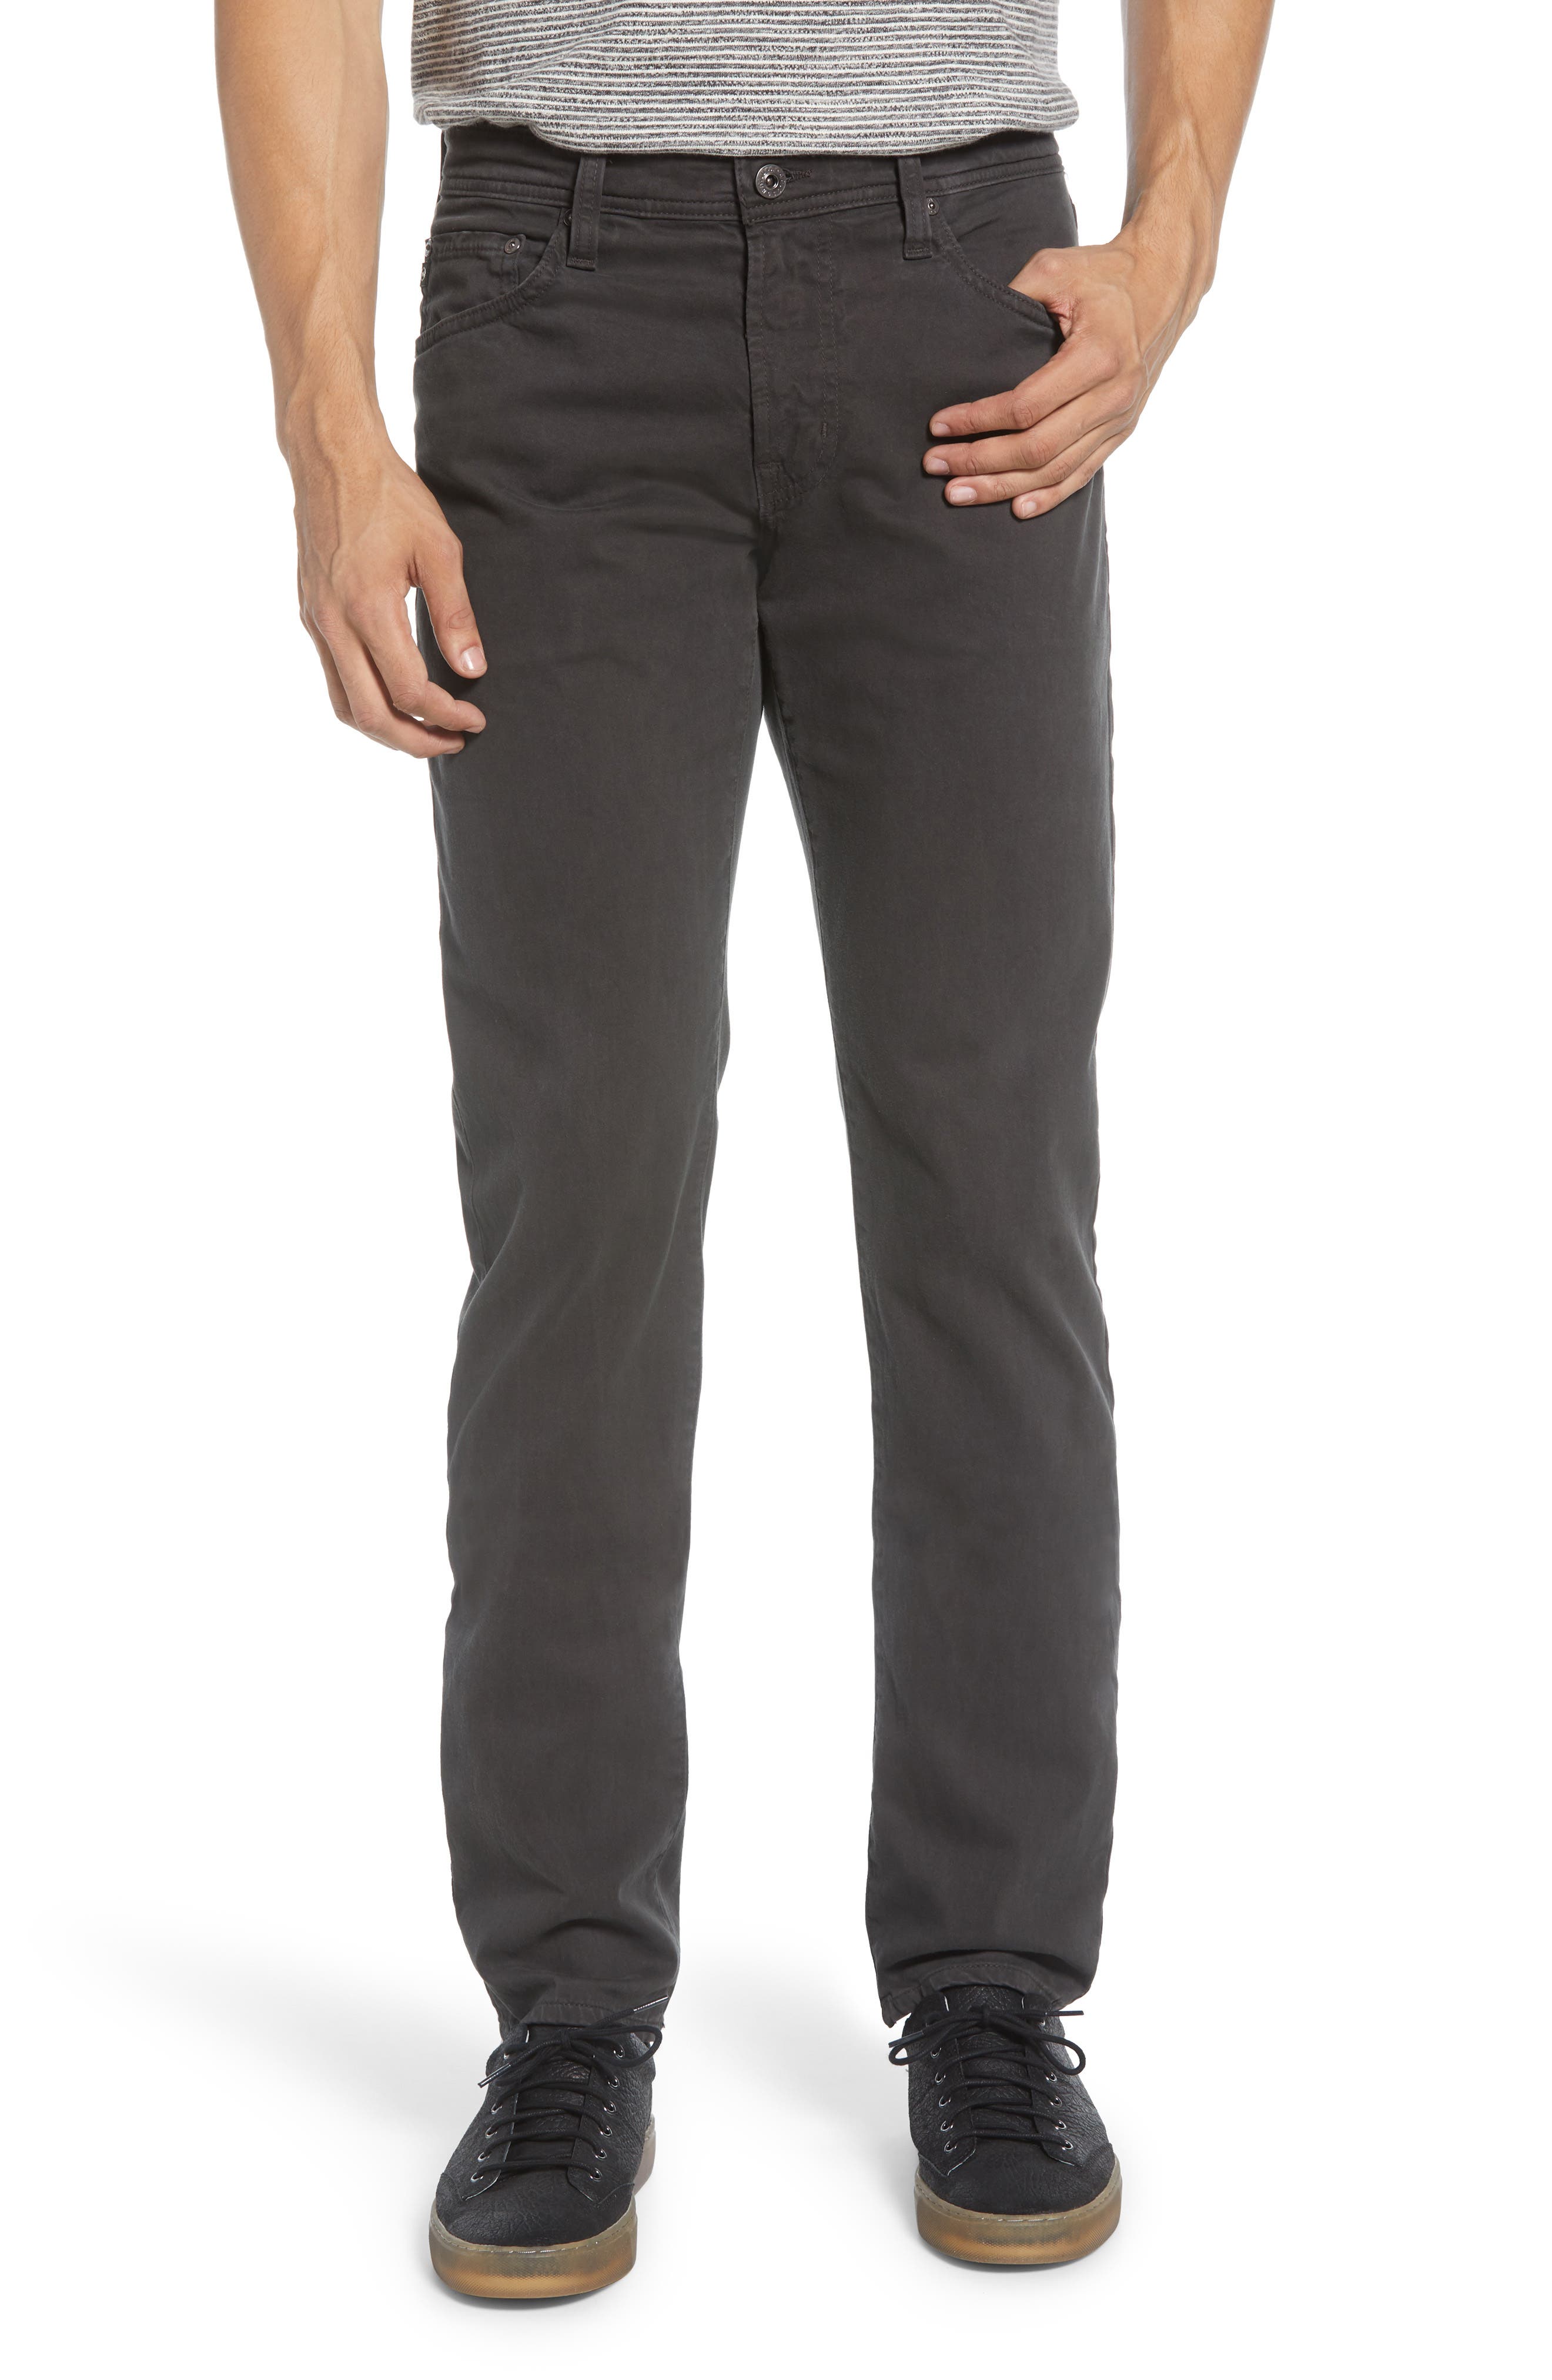 pacsun double wash high rise jeggings